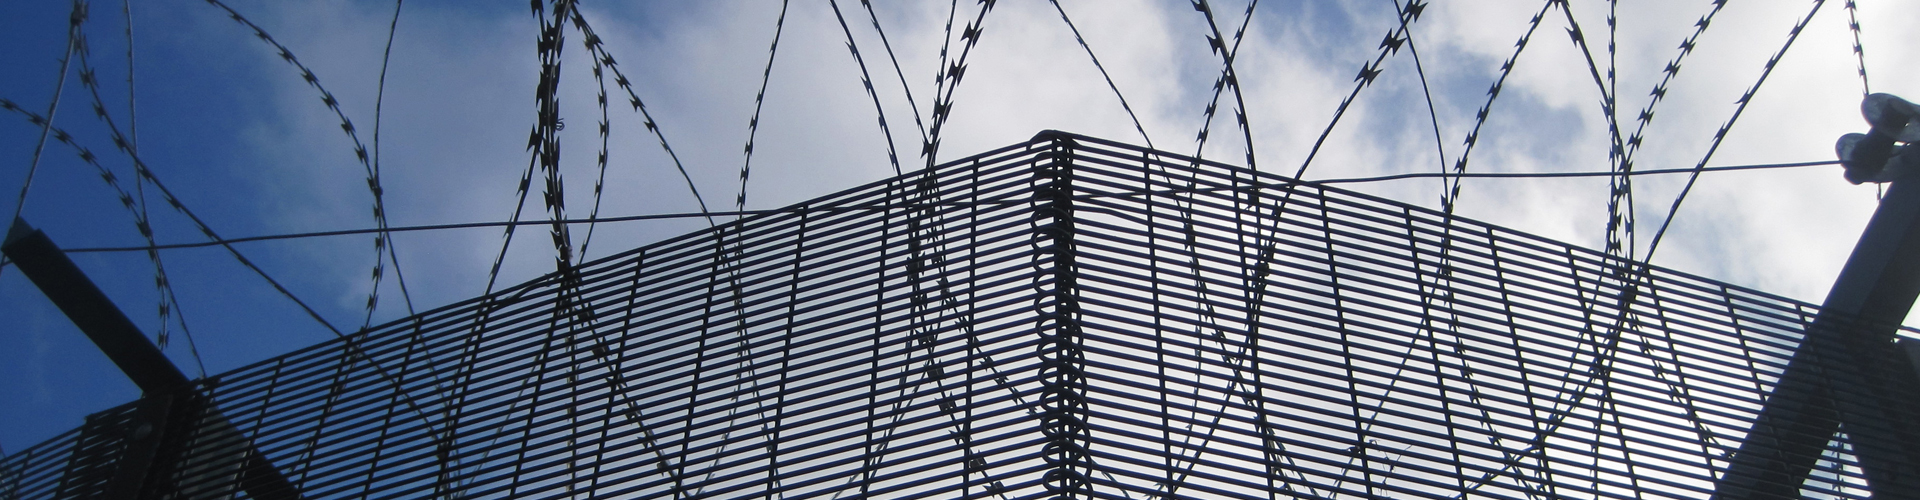 High Security with Razor Wire 358 Security Fence